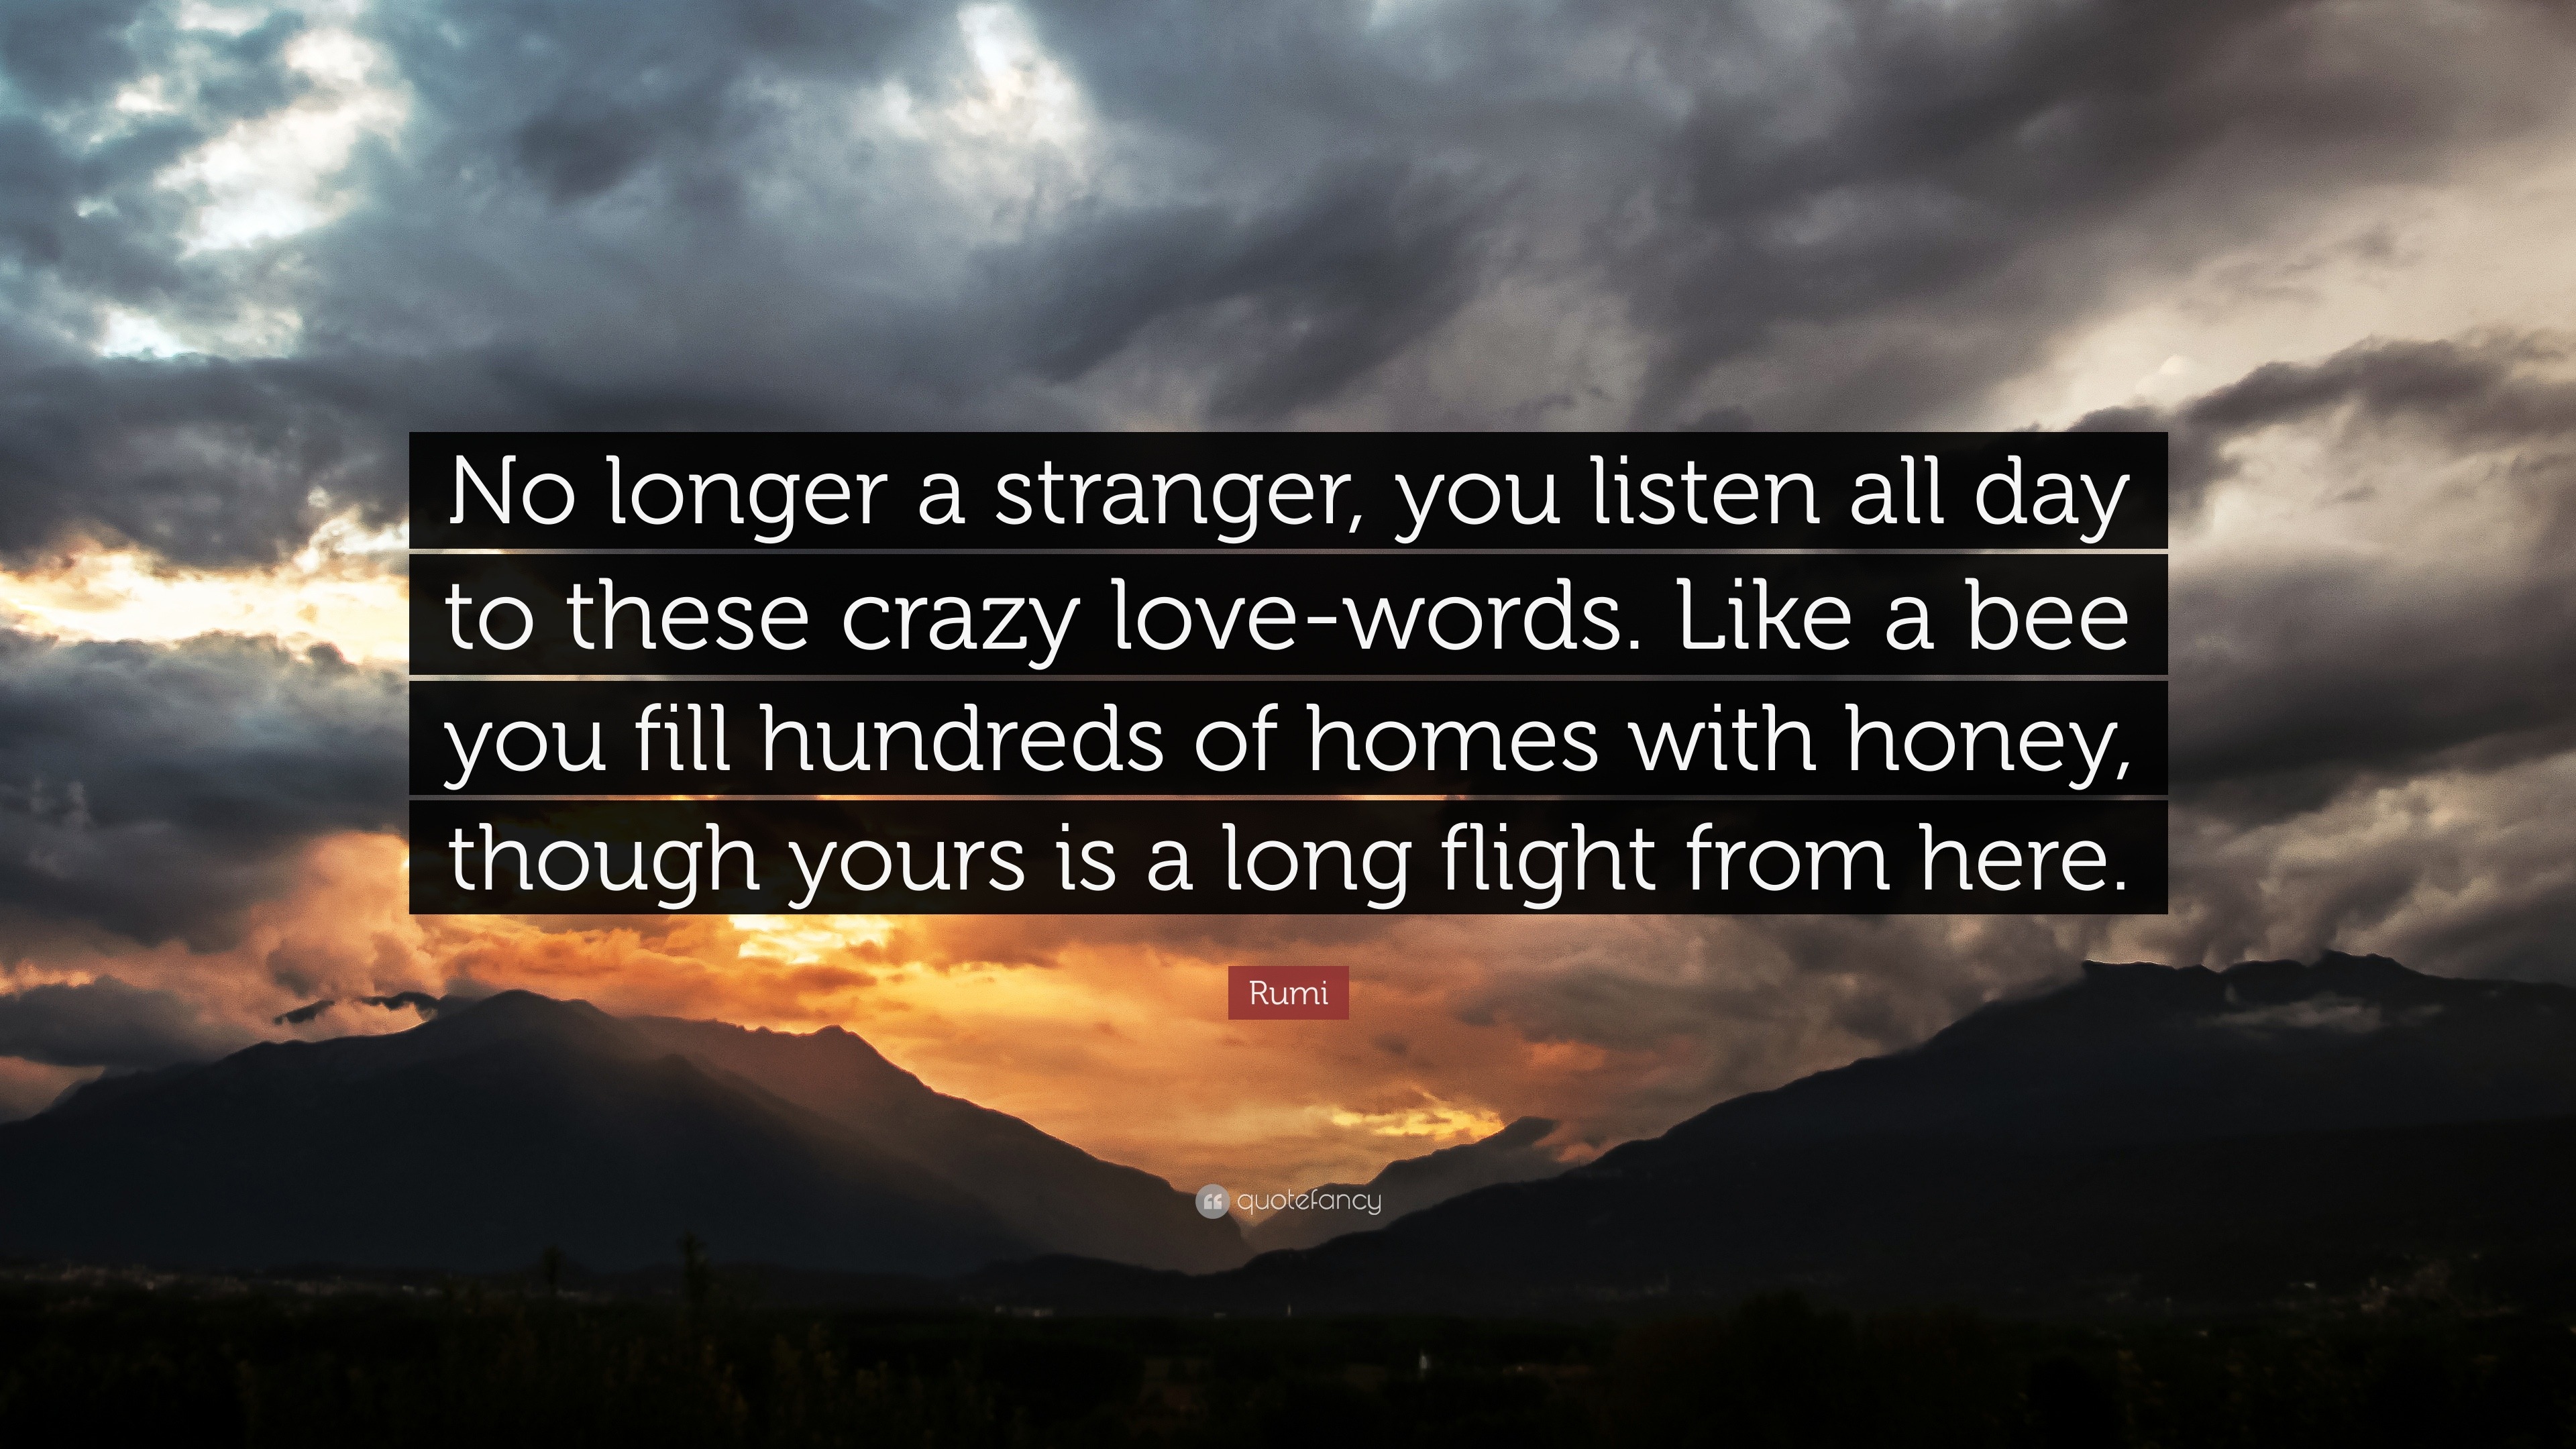 Rumi Quote “No longer a stranger you listen all day to these crazy